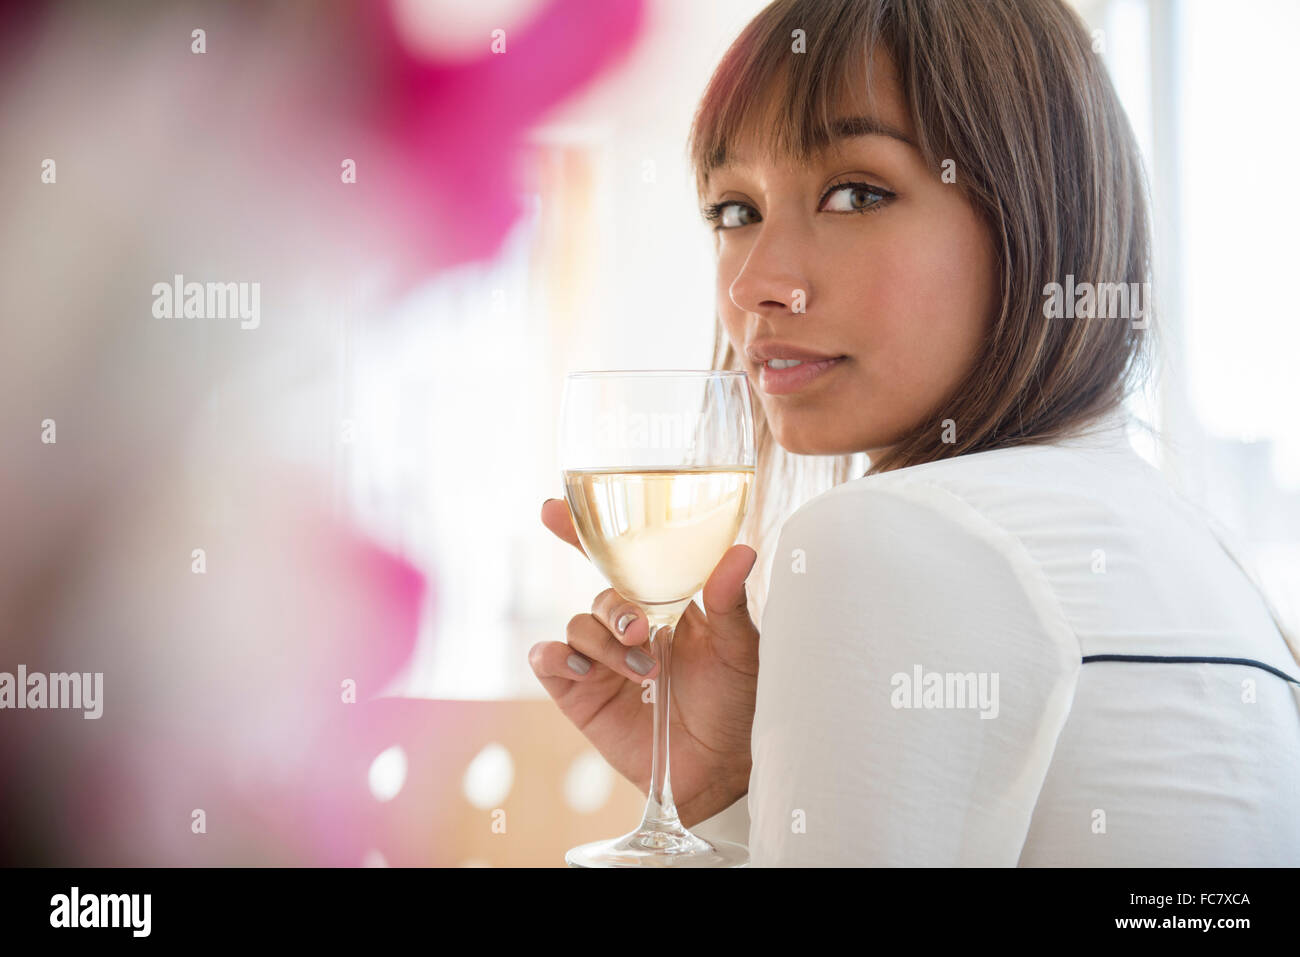 Mixed Race woman drinking white wine Banque D'Images